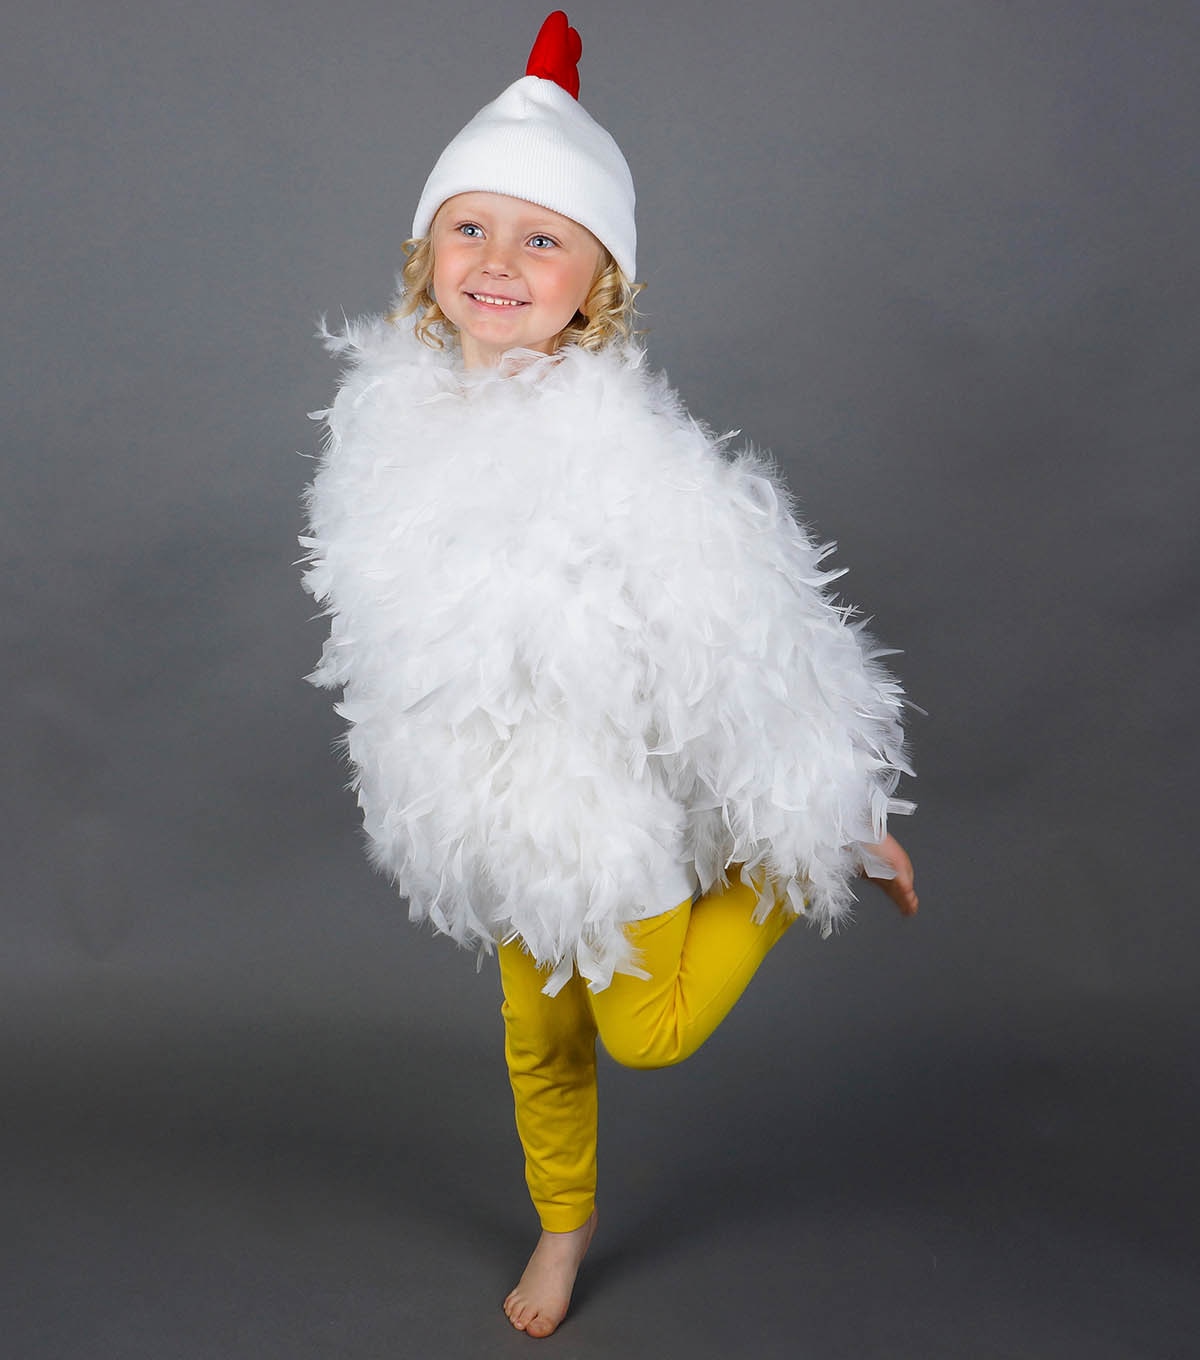 How To Make A Cute Chicken Costume | JOANN